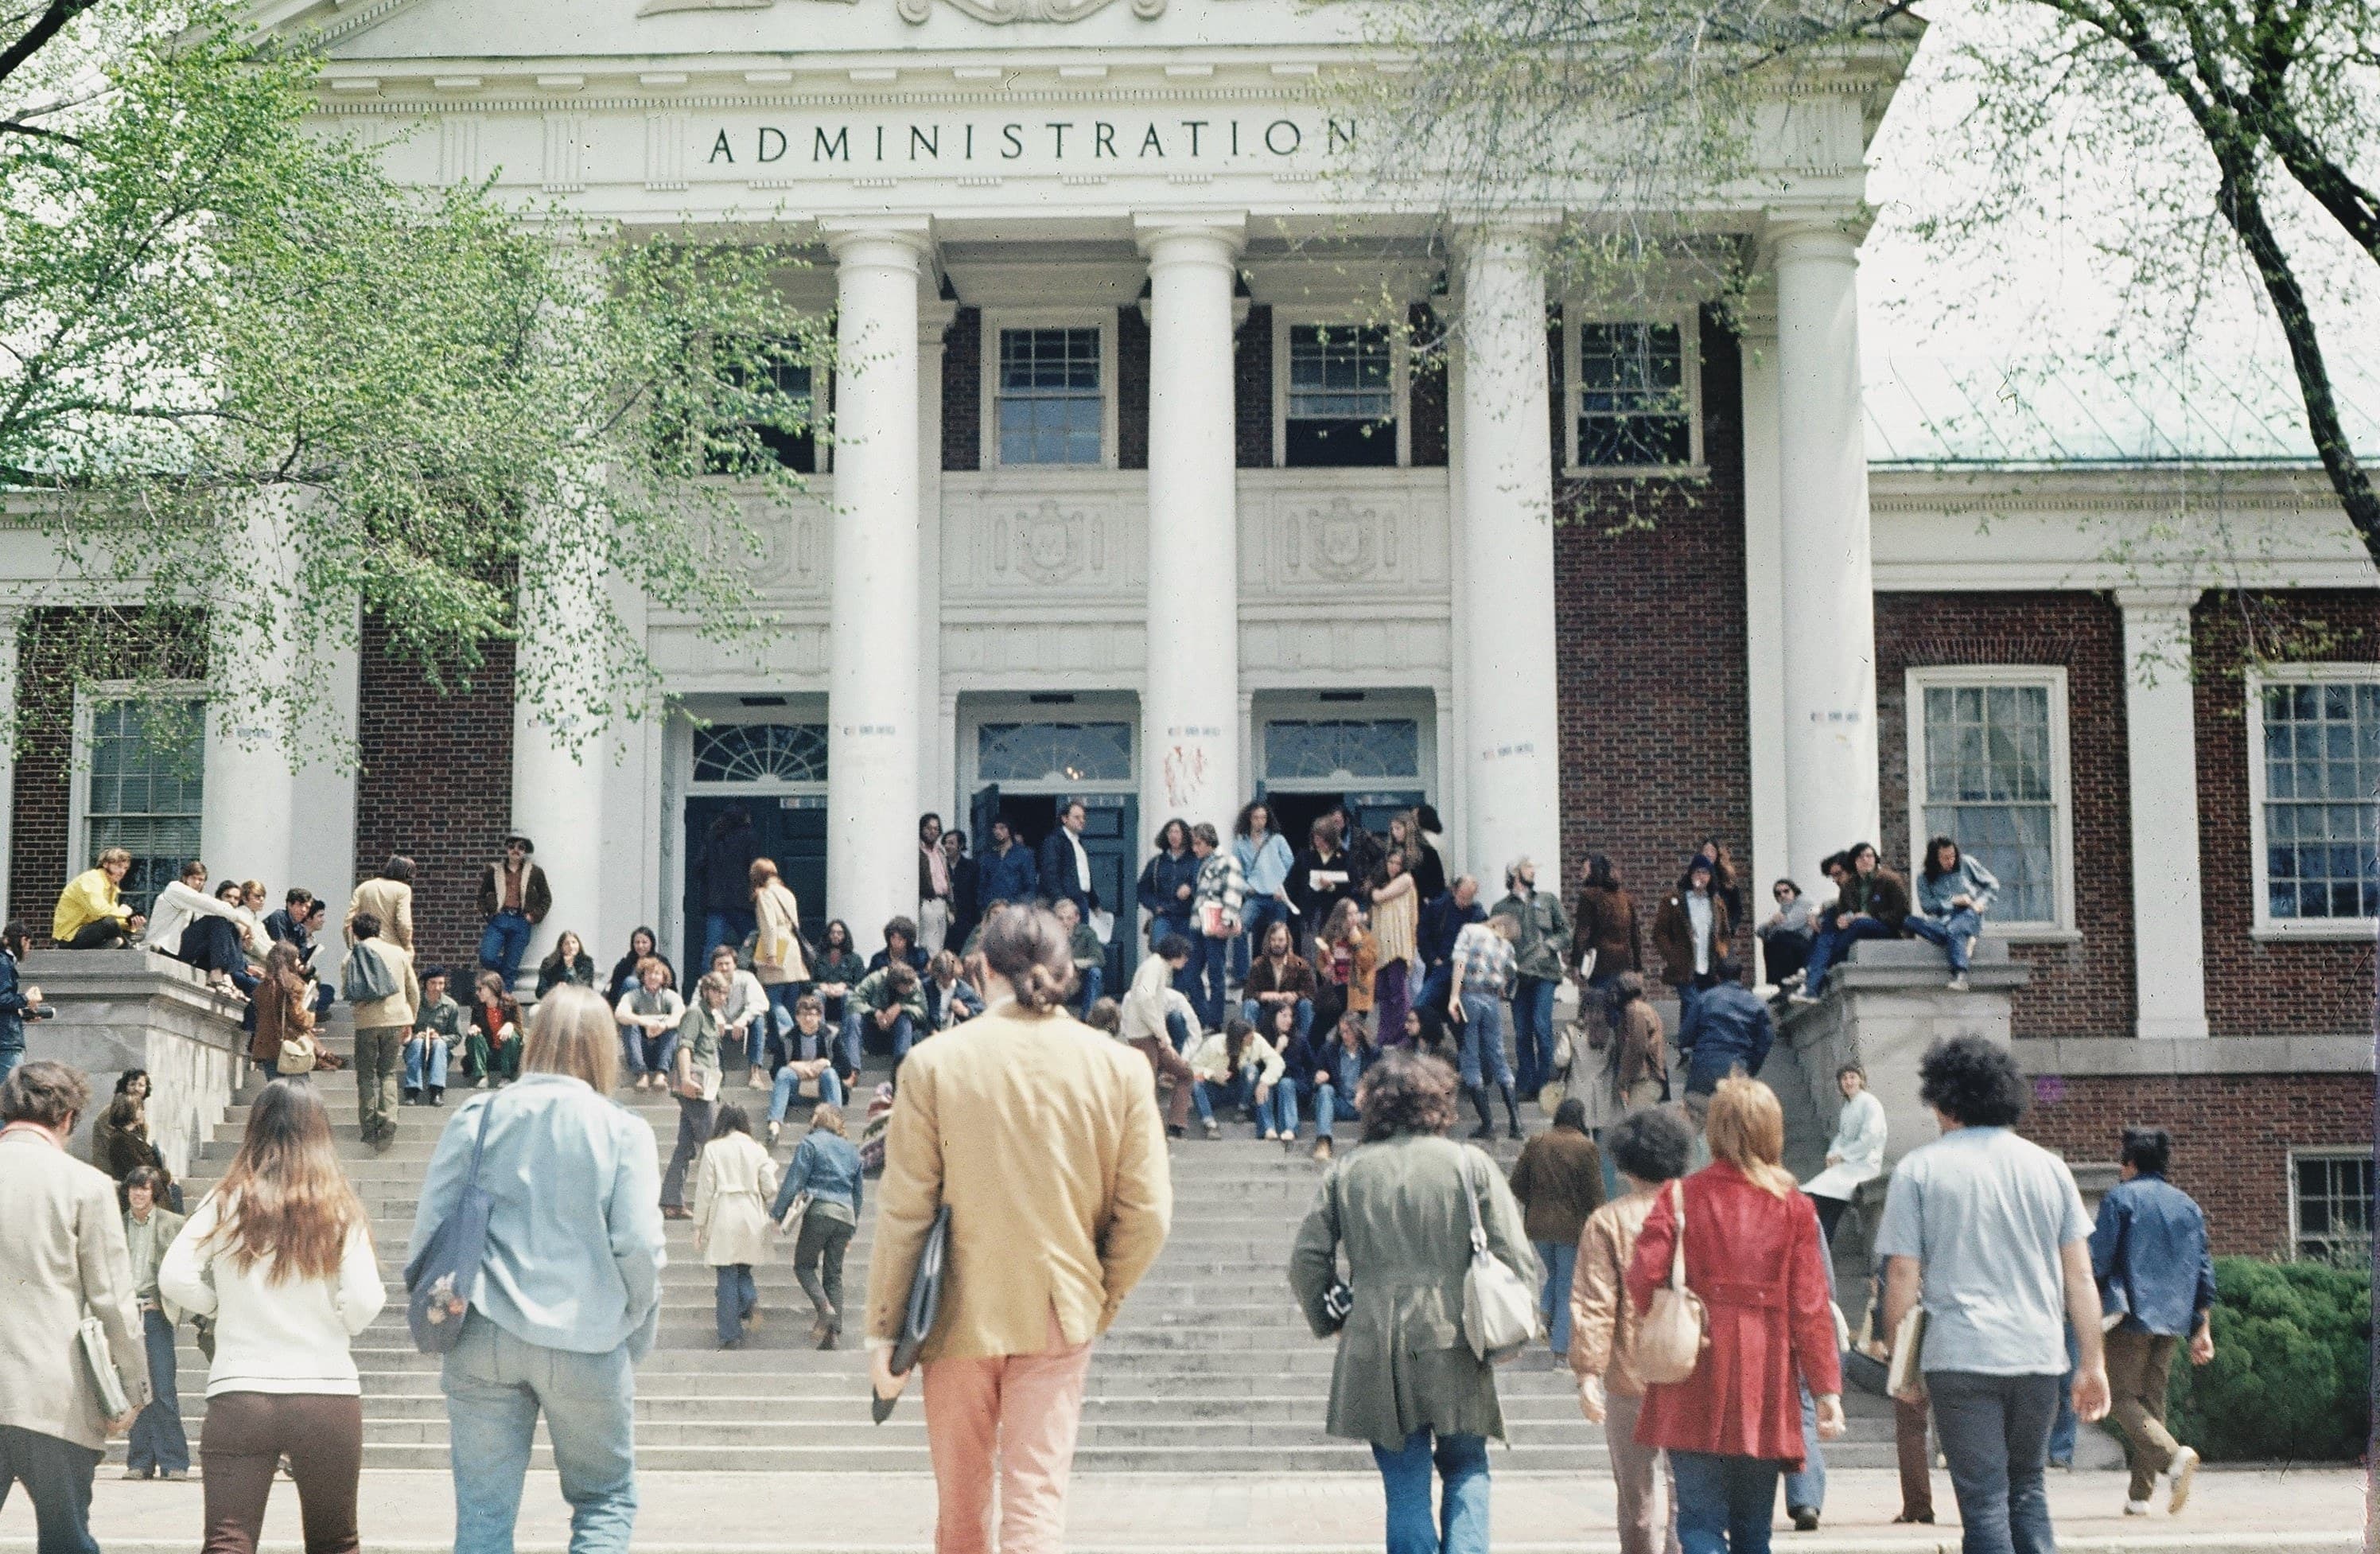 Student protest at the Administration building in 1971